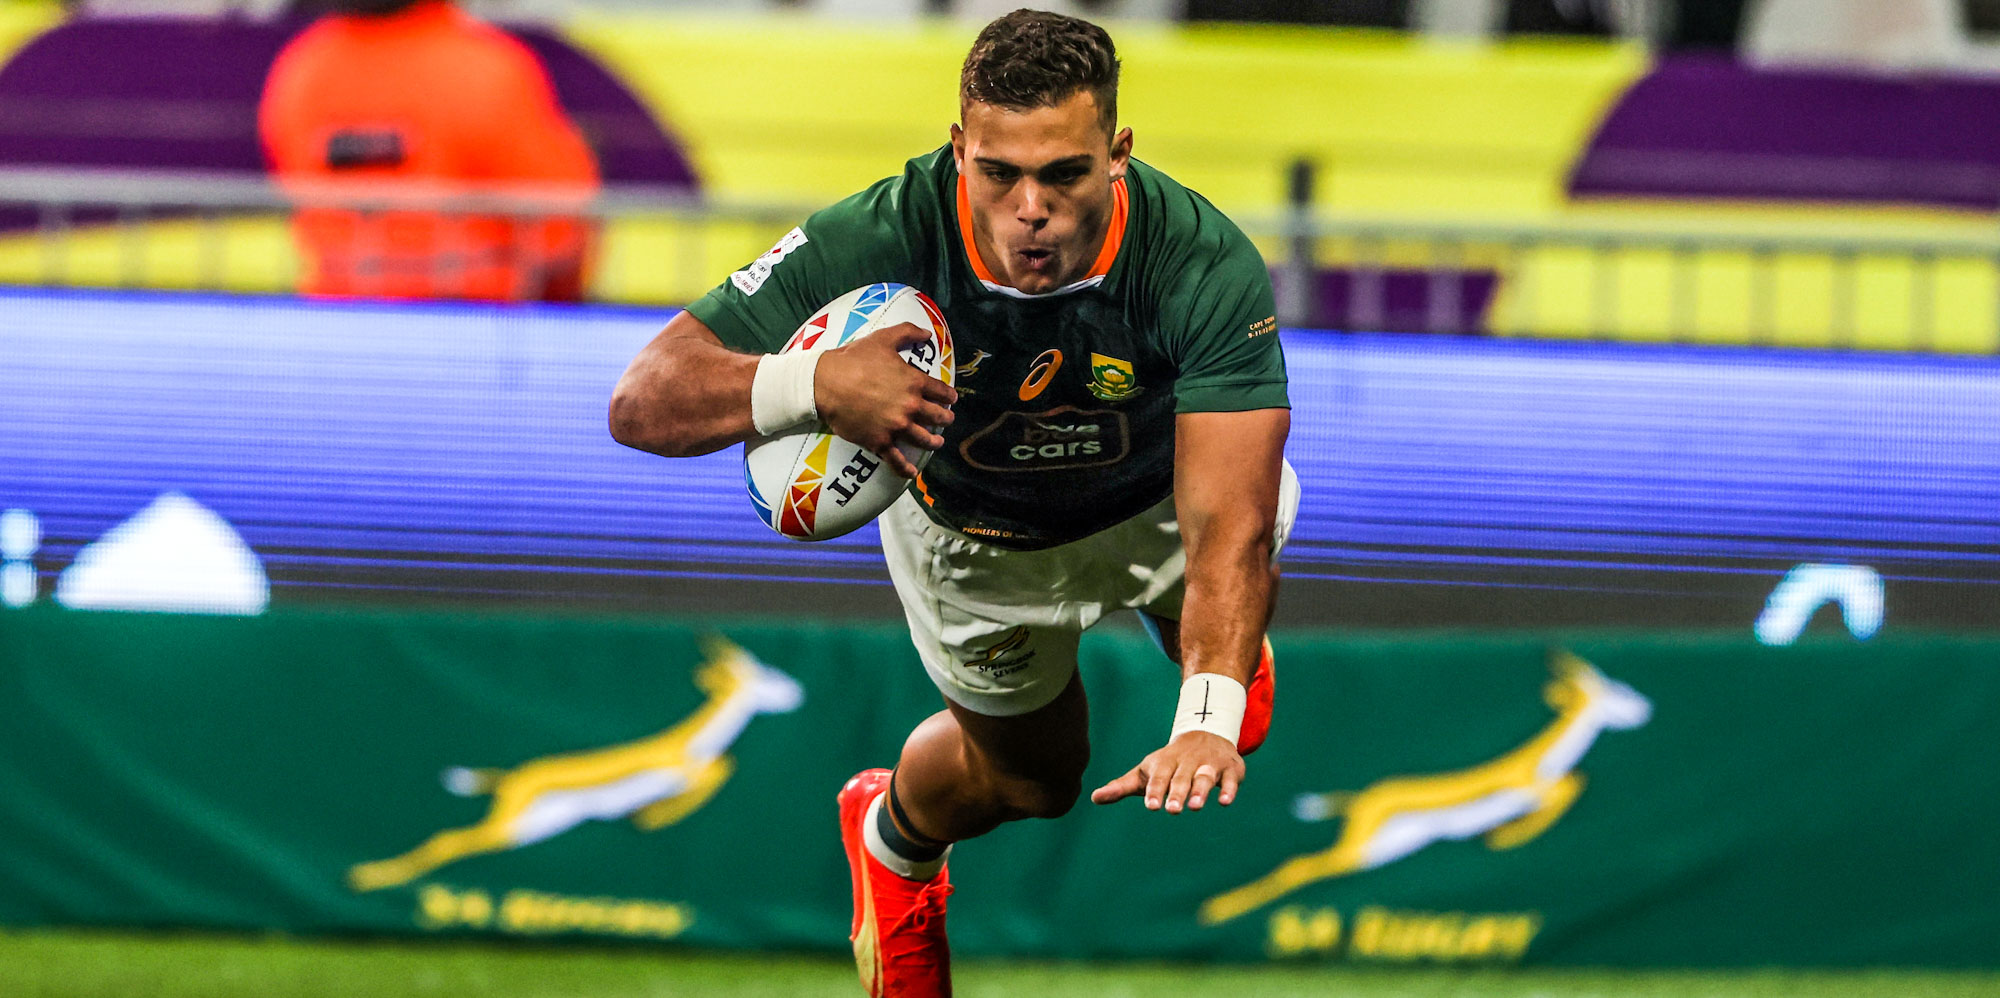 Muller du Plessis goes over for the Blitzboks' first try of the match.